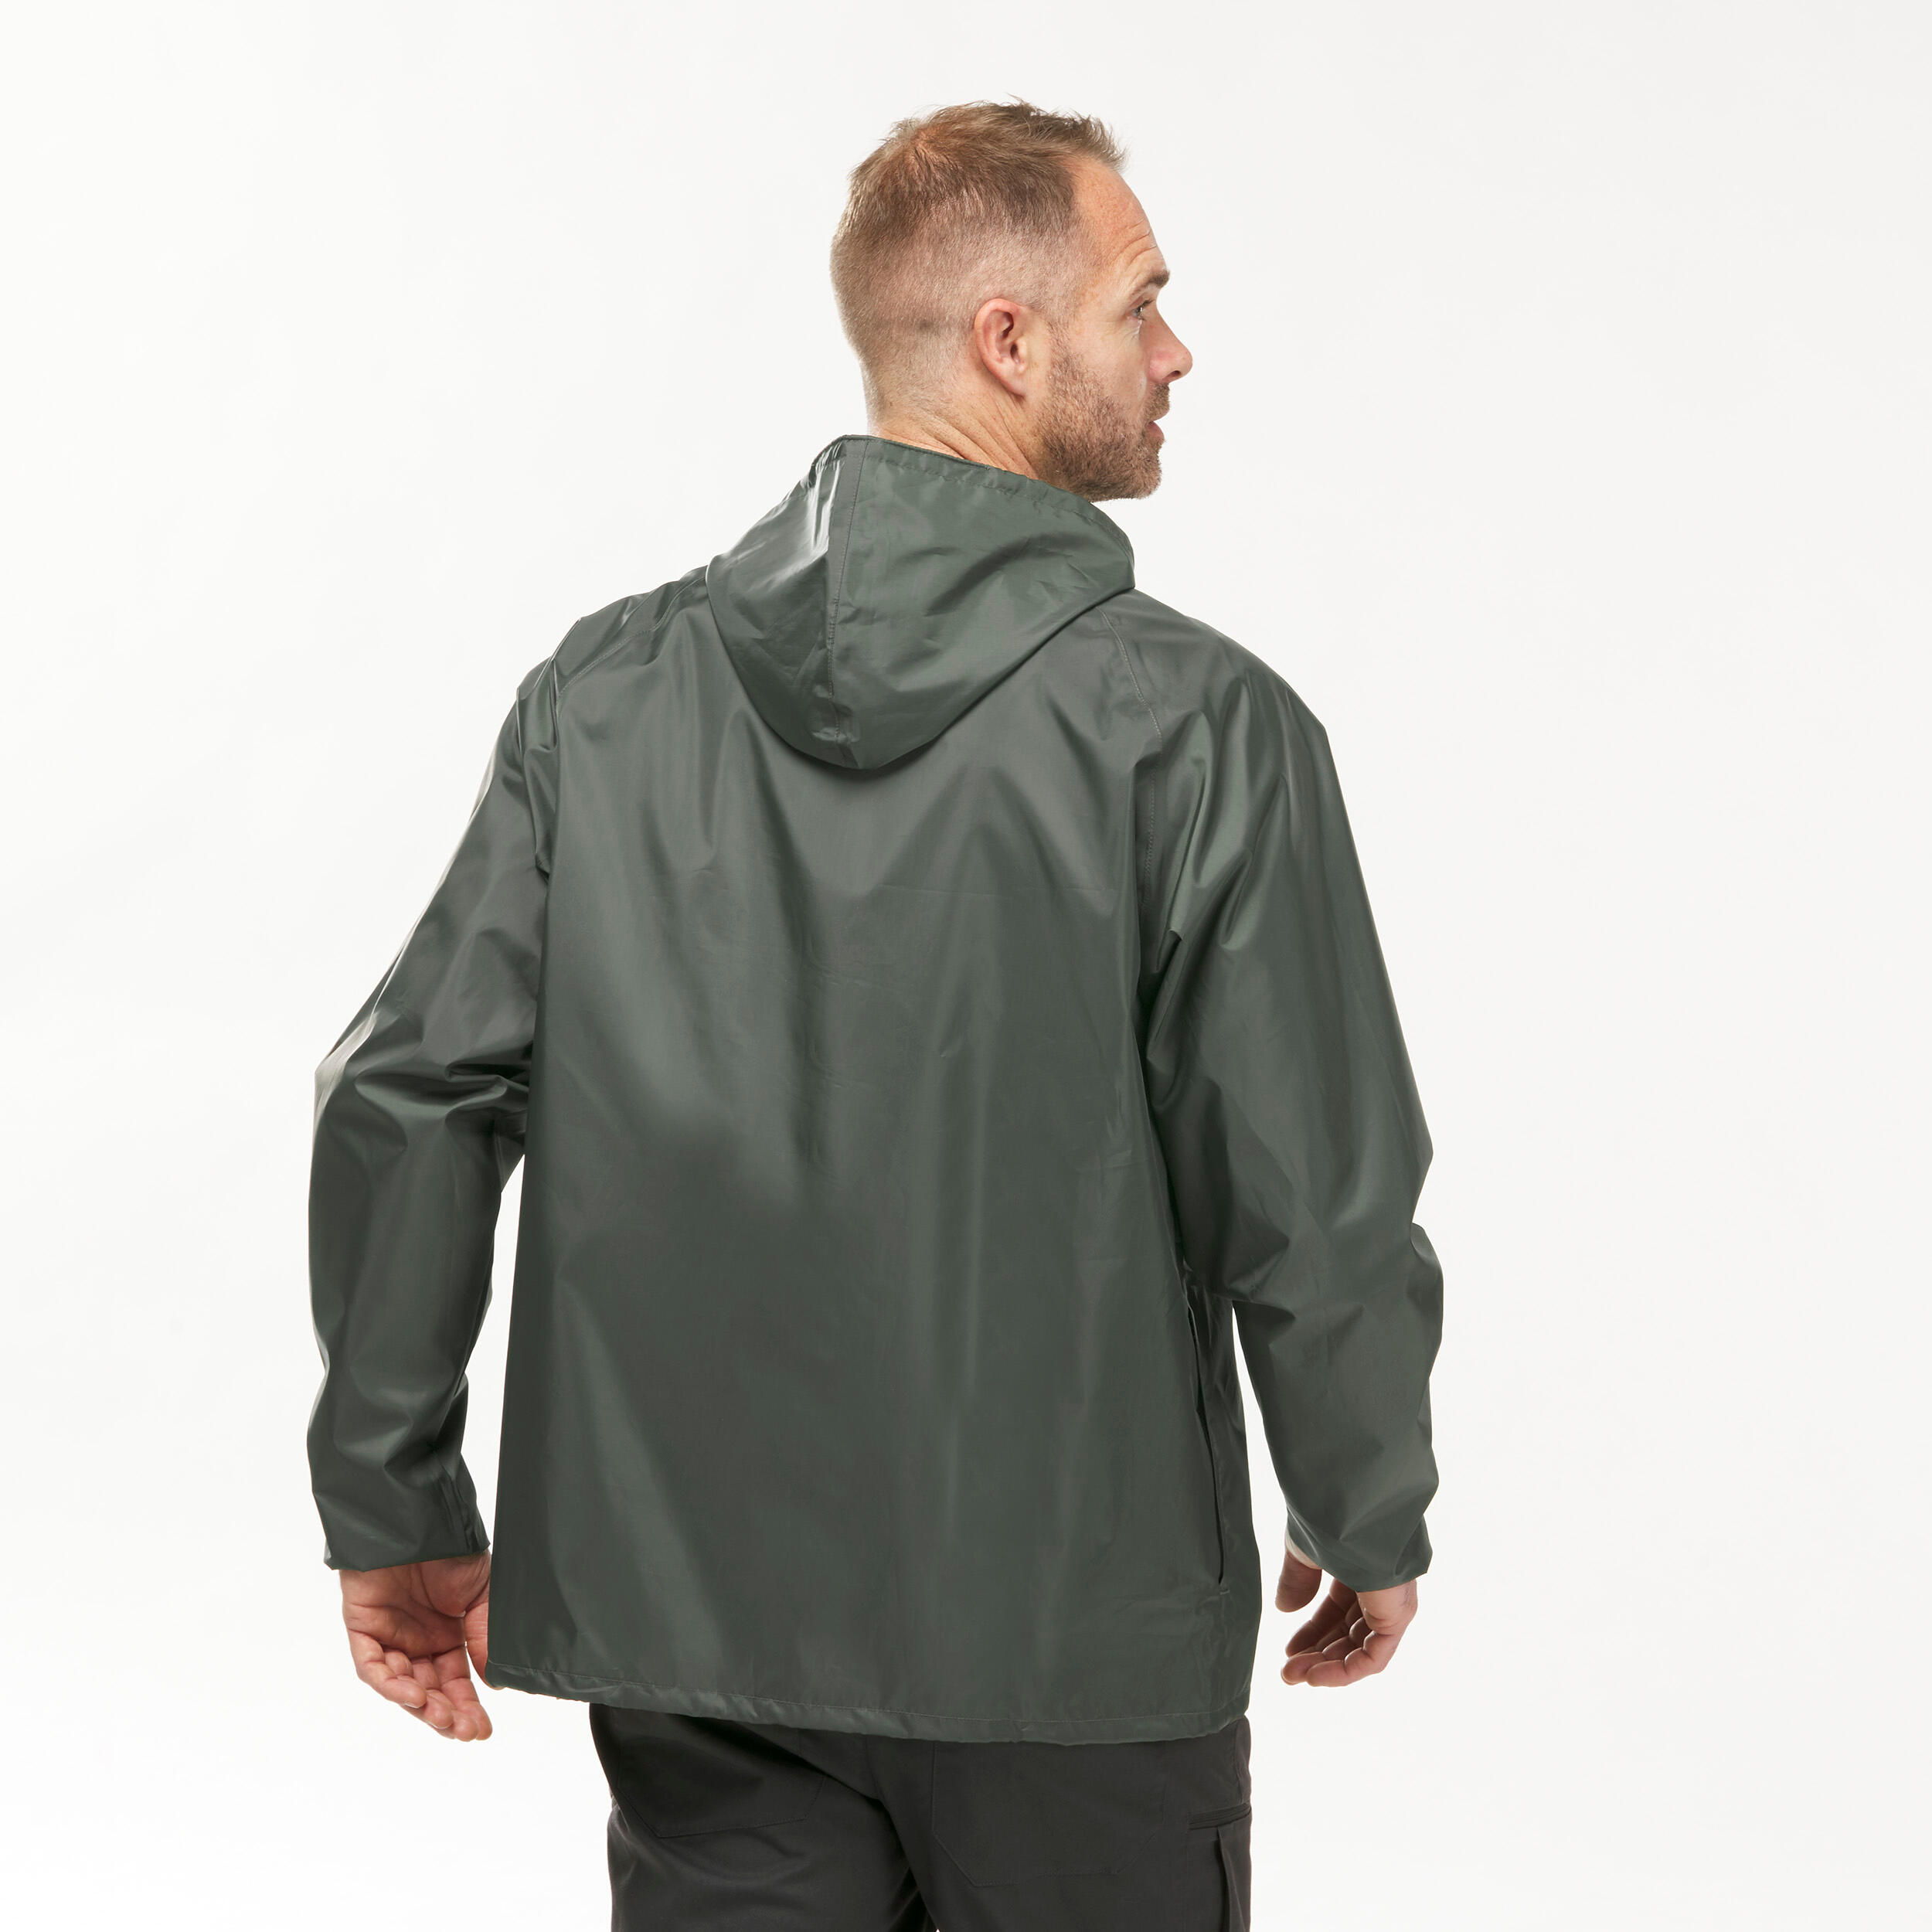 The Best Waterproof Jackets  Buyers Guide to Rains  Coggles